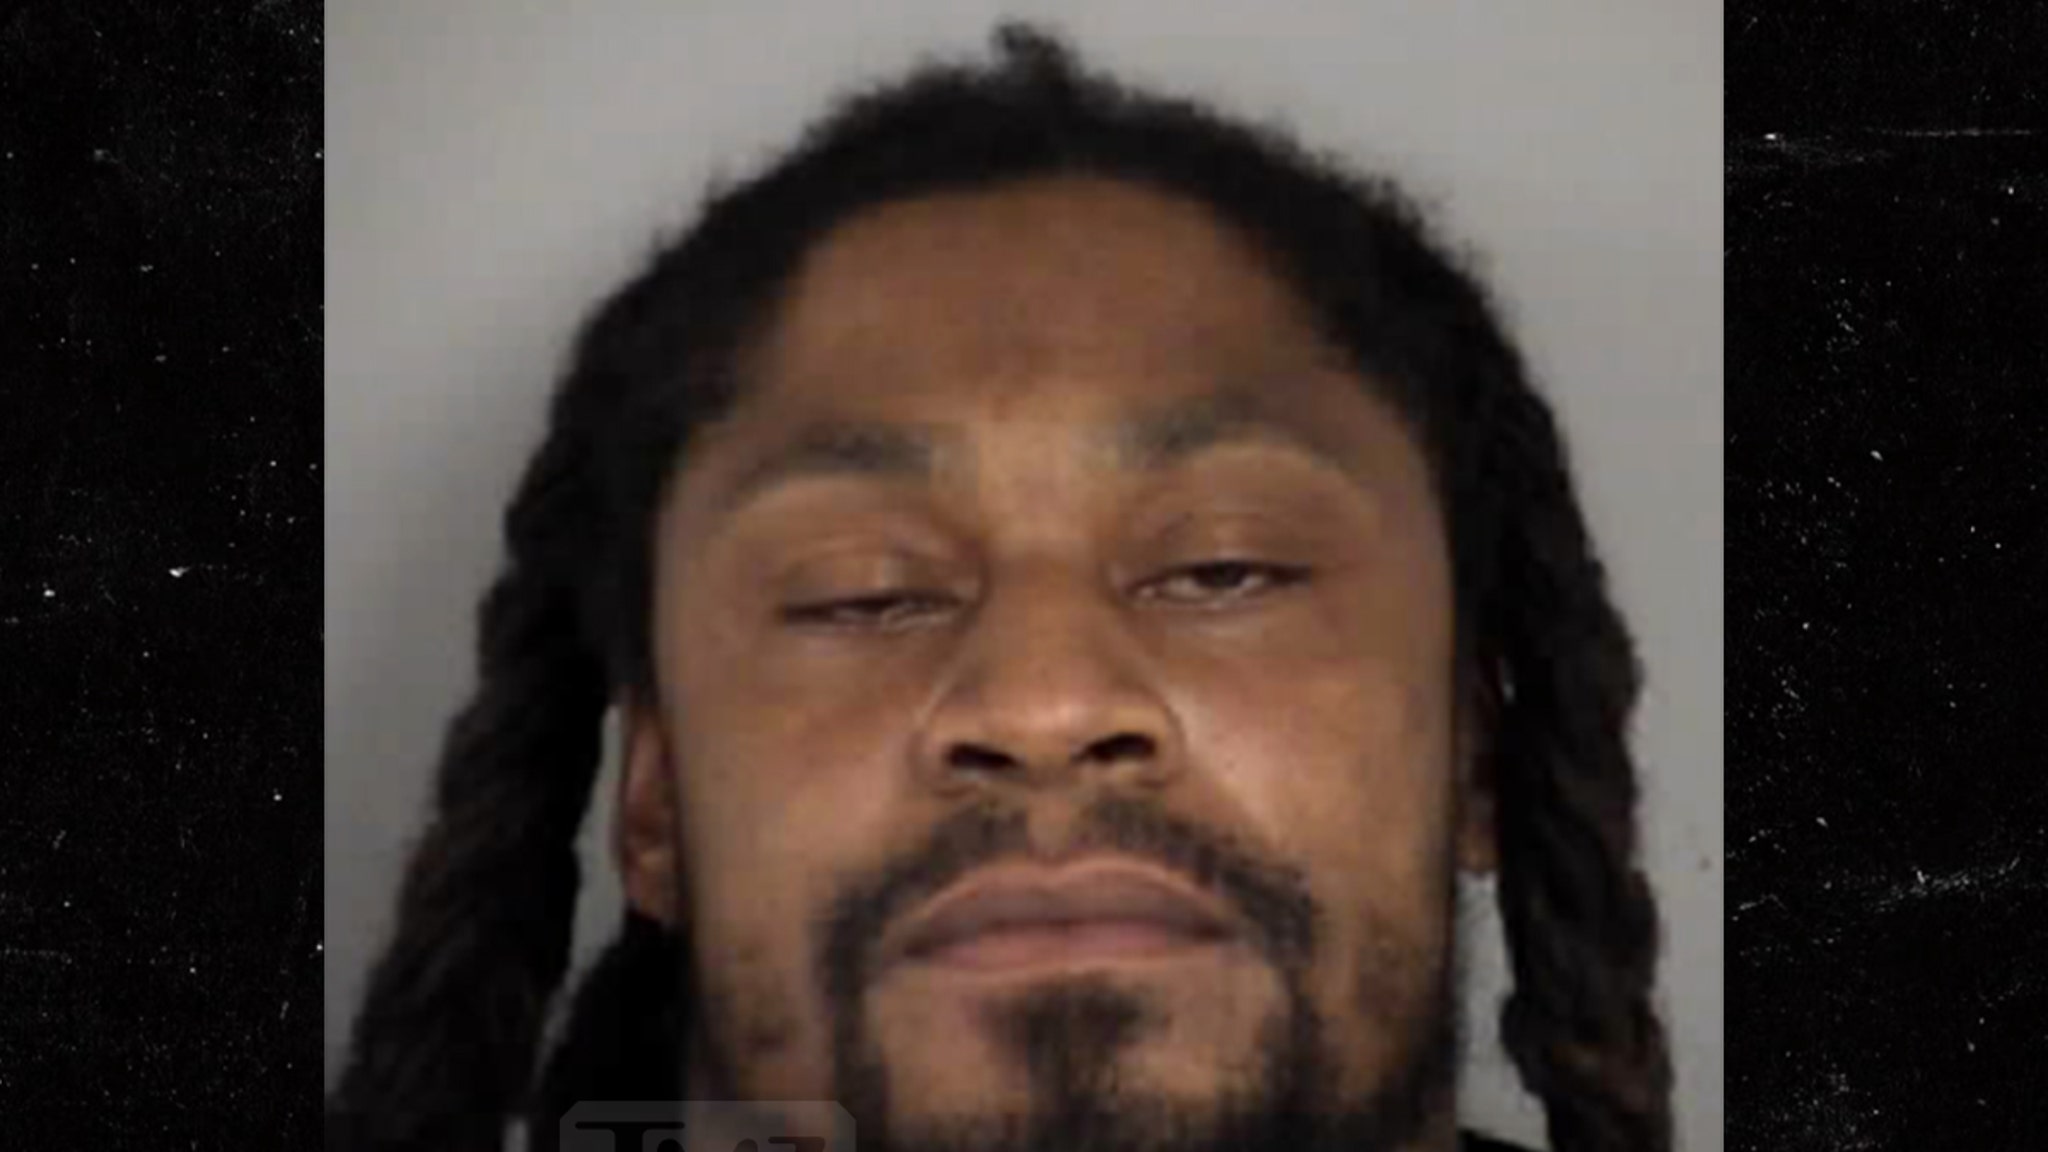 Marshawn Lynch Reeked Of Booze, Said He Stole Car During DUI Arrest, Cops Say